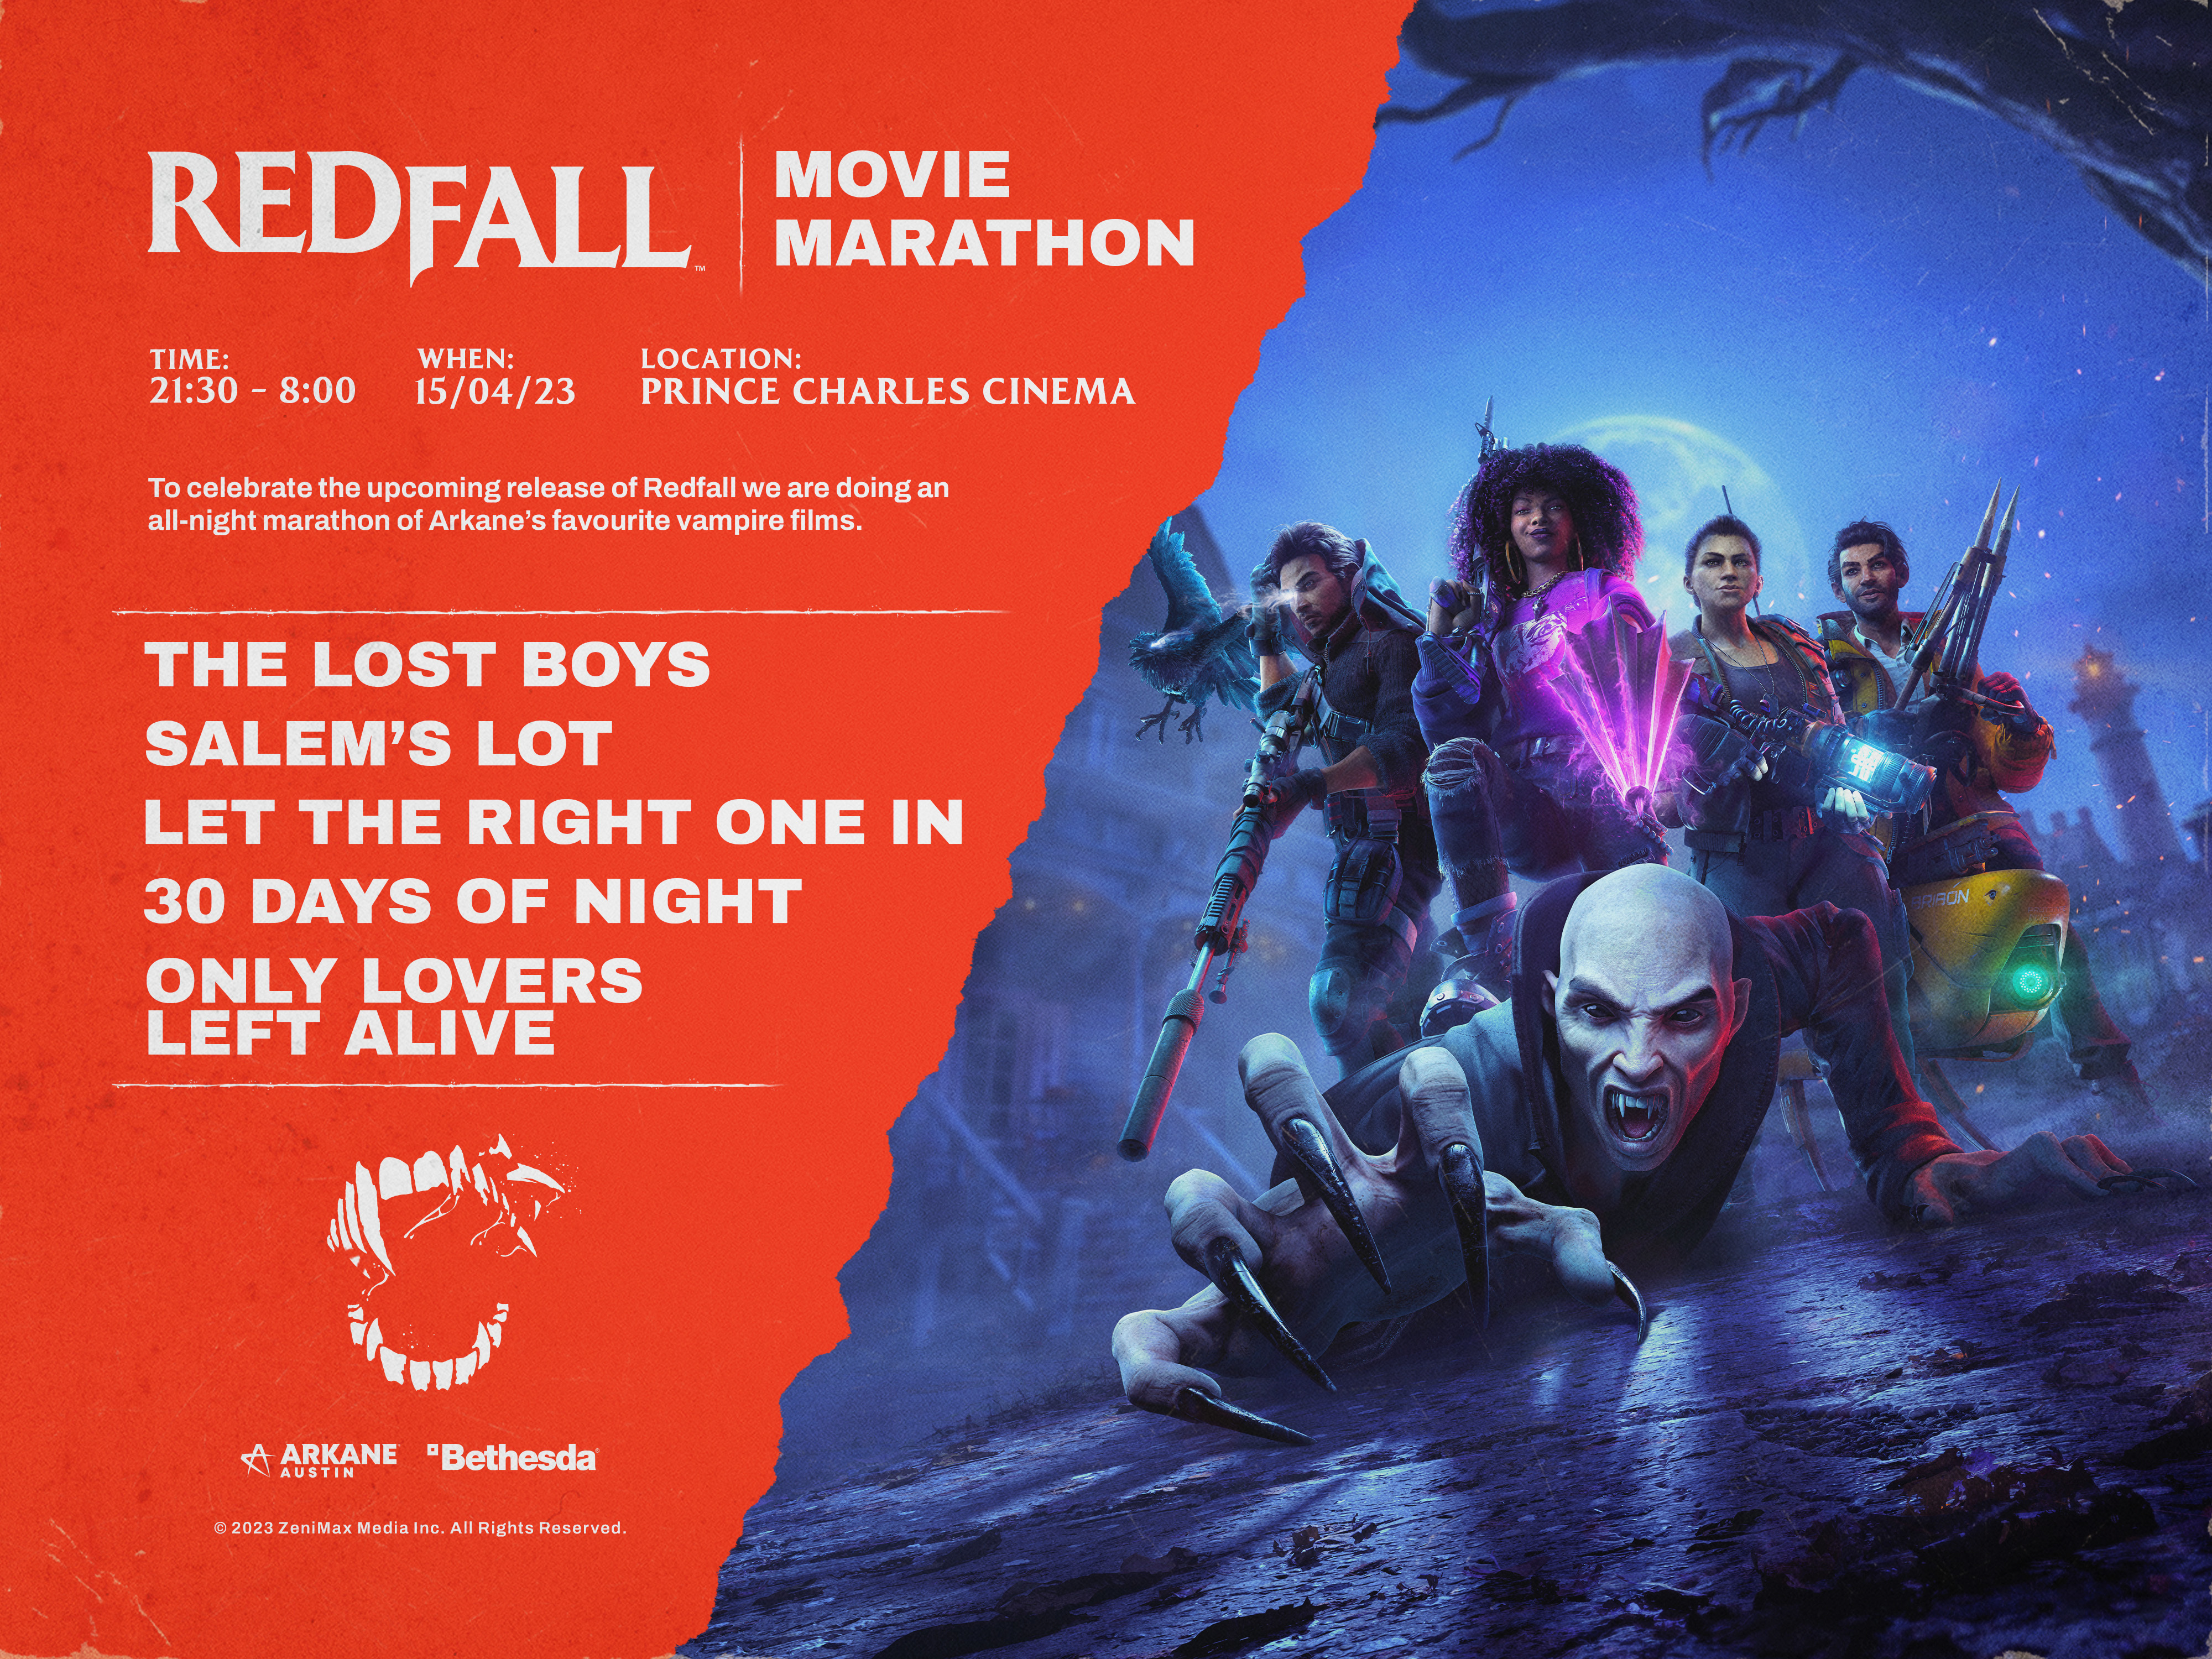 Get into the Redfall spirit with a vampire-themed movie night in London